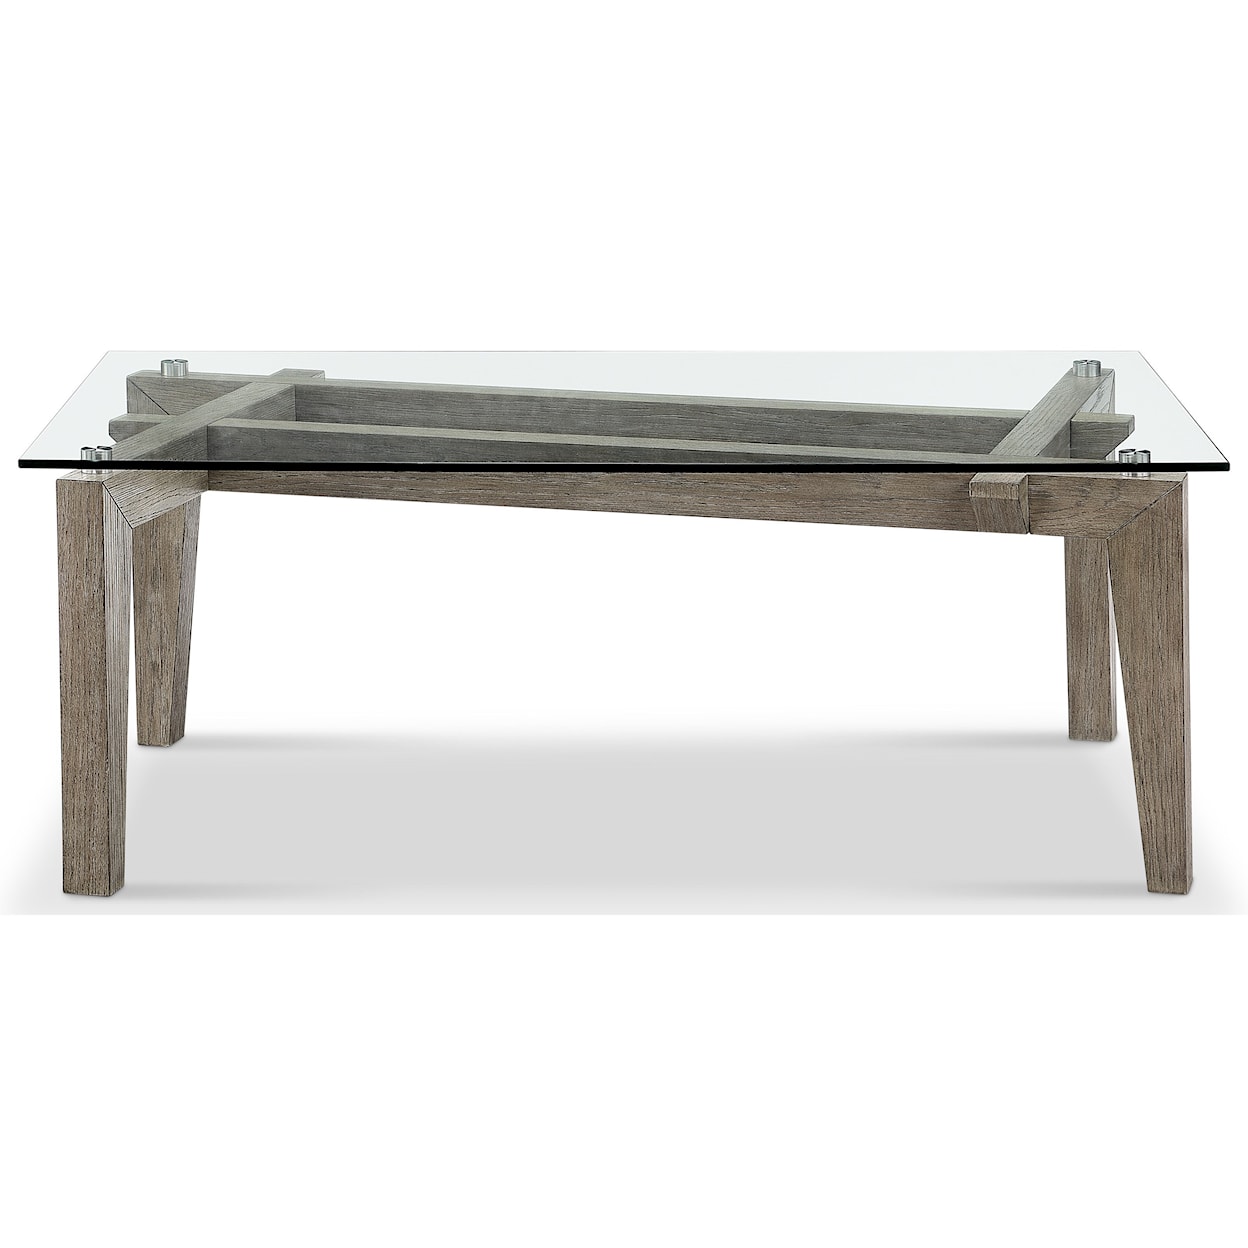 Magnussen Home Exeter Occasional Tables Cocktail Table